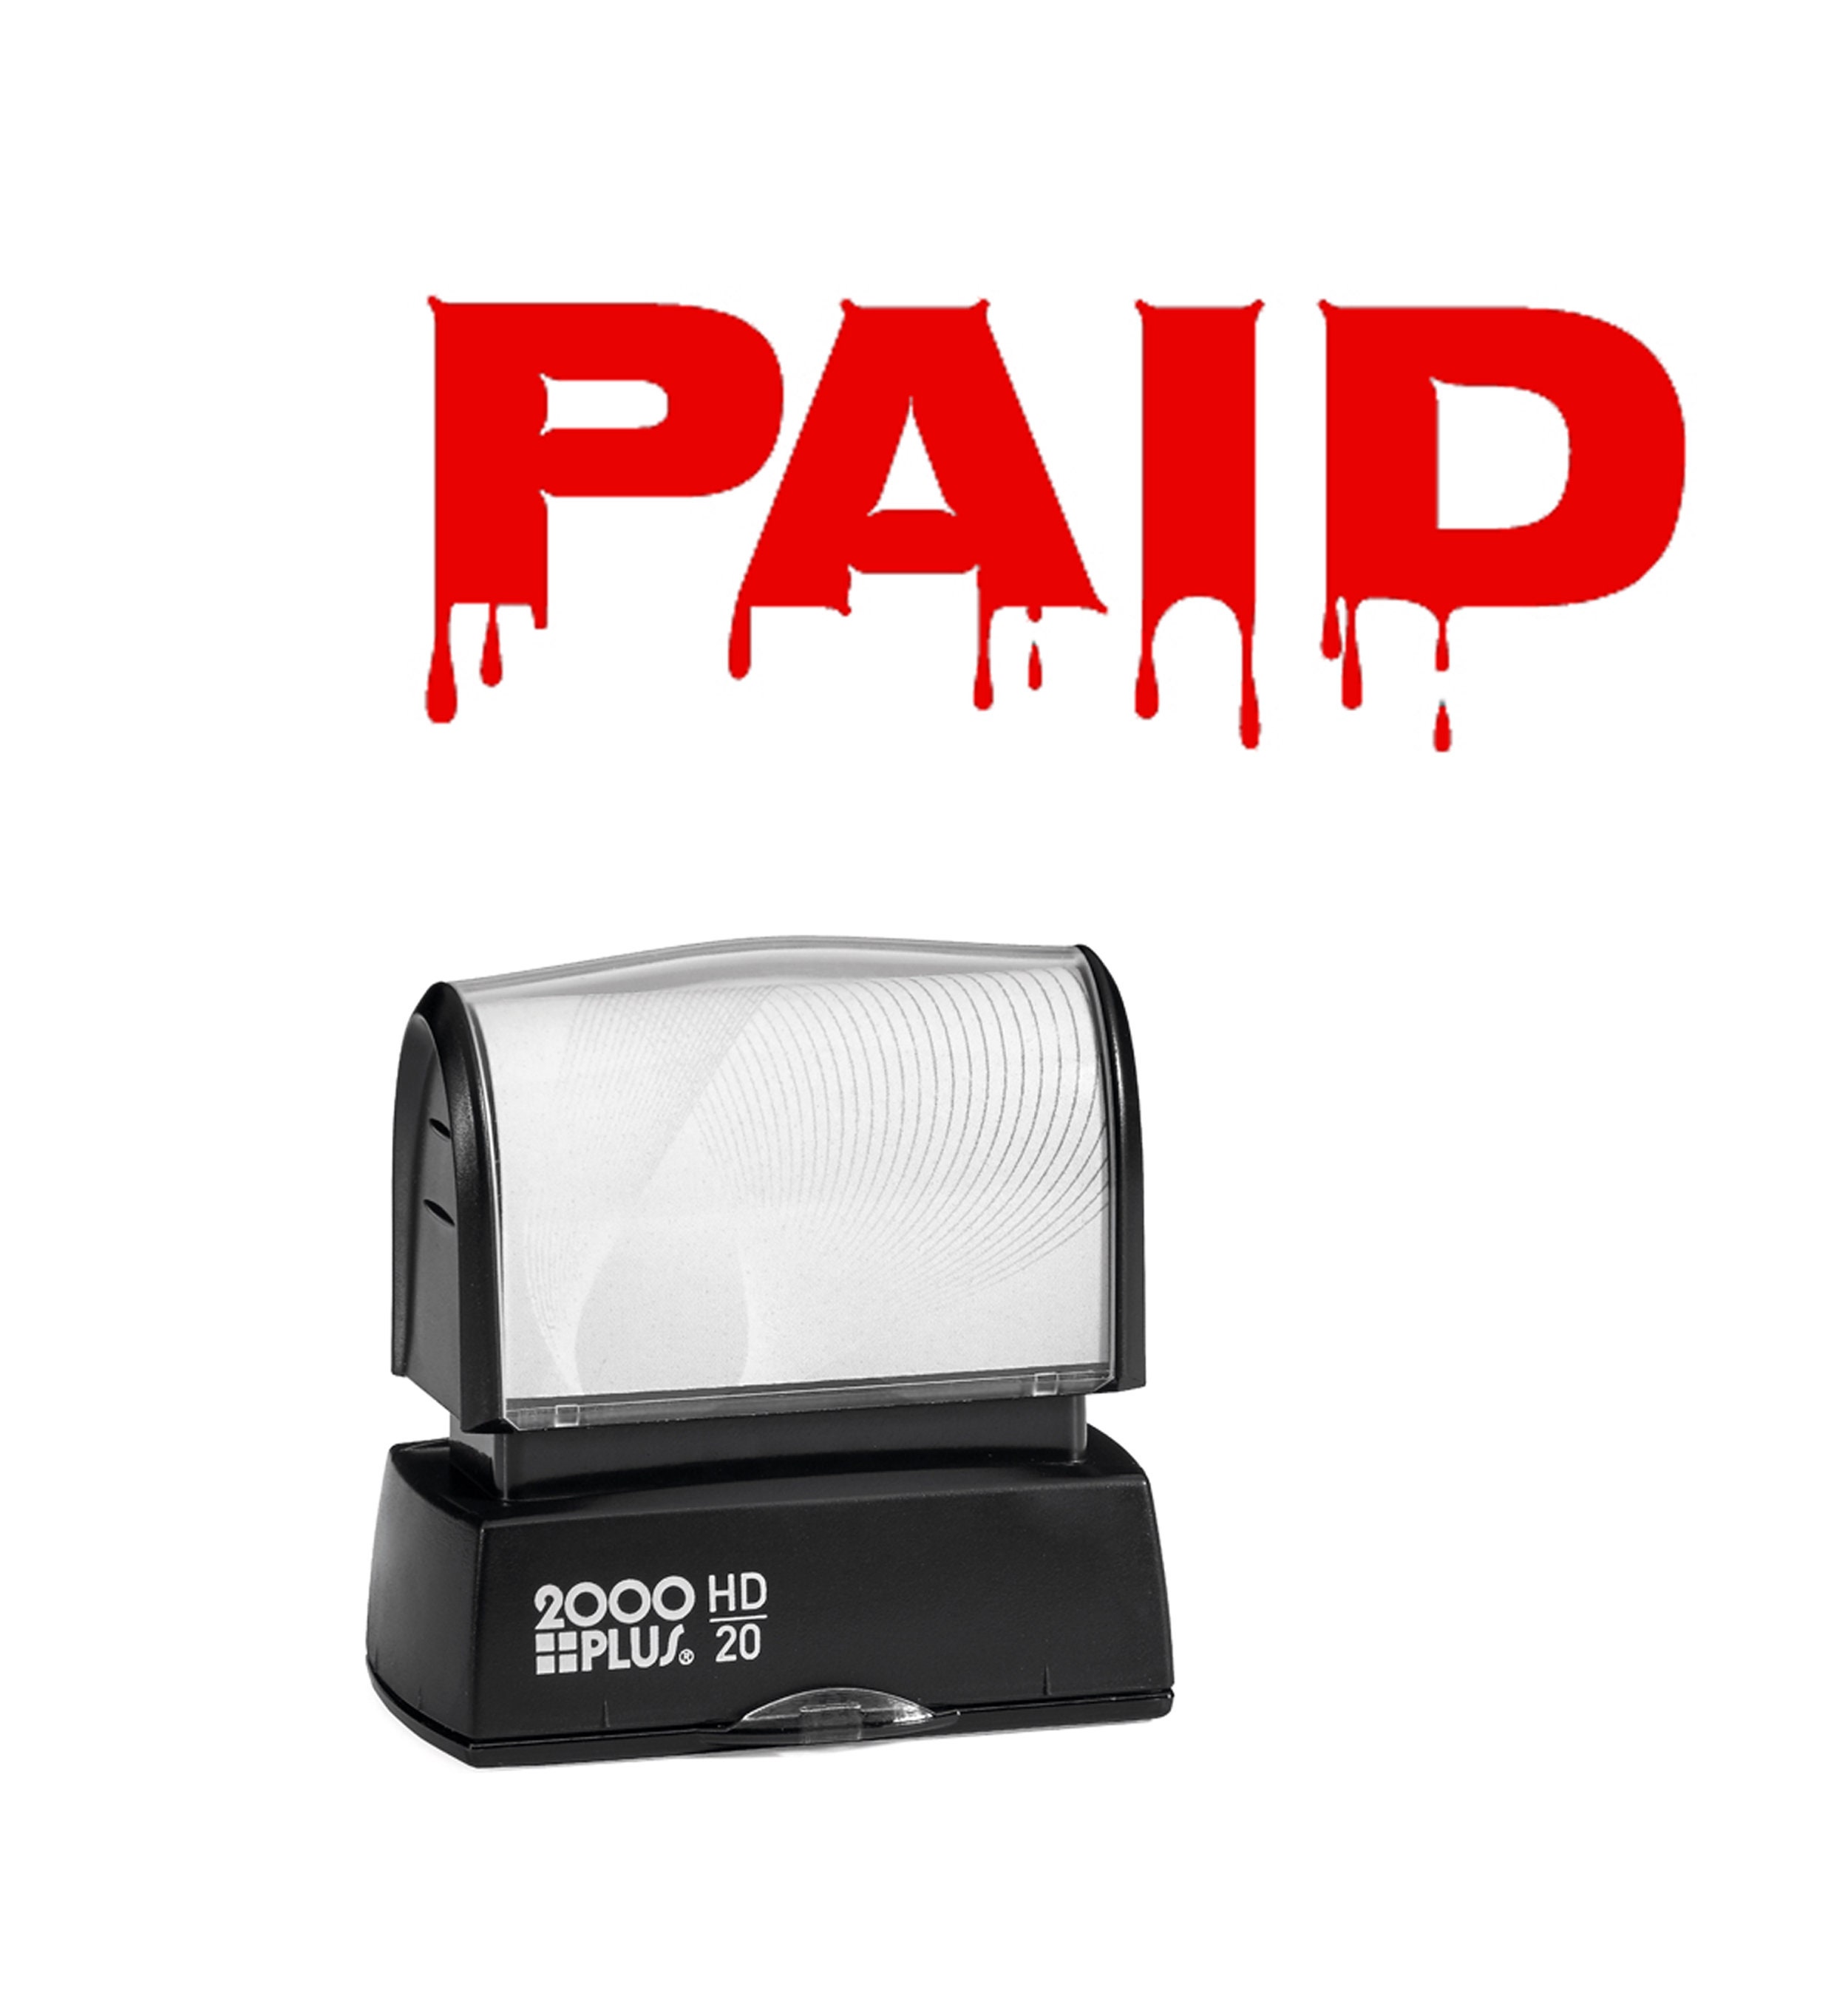 Humorous Paid Stamp For Business Or Home - Self Inking Red Ink Paying Bills To Use With Your Including Etsy Shop